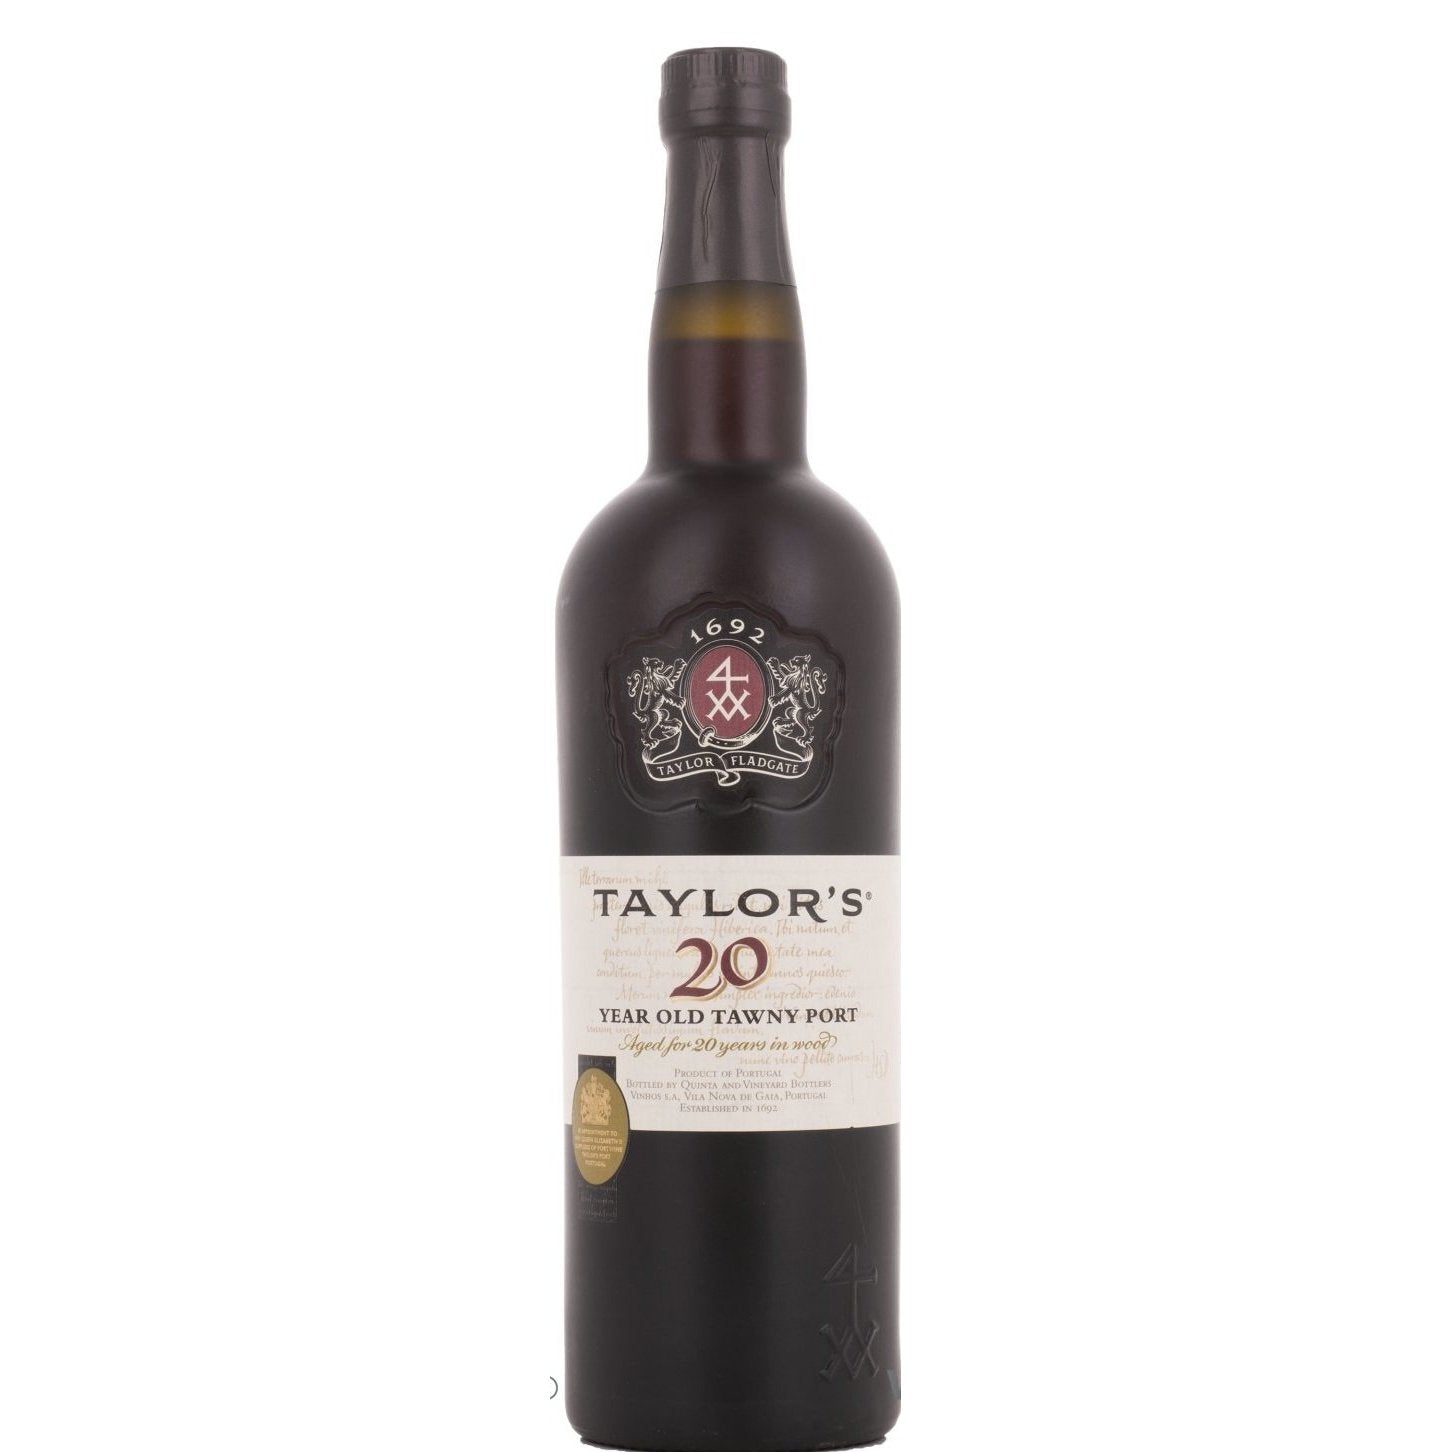 Taylor's 20 Years Old Tawny Port 20% Vol. 0,75l in Giftbox